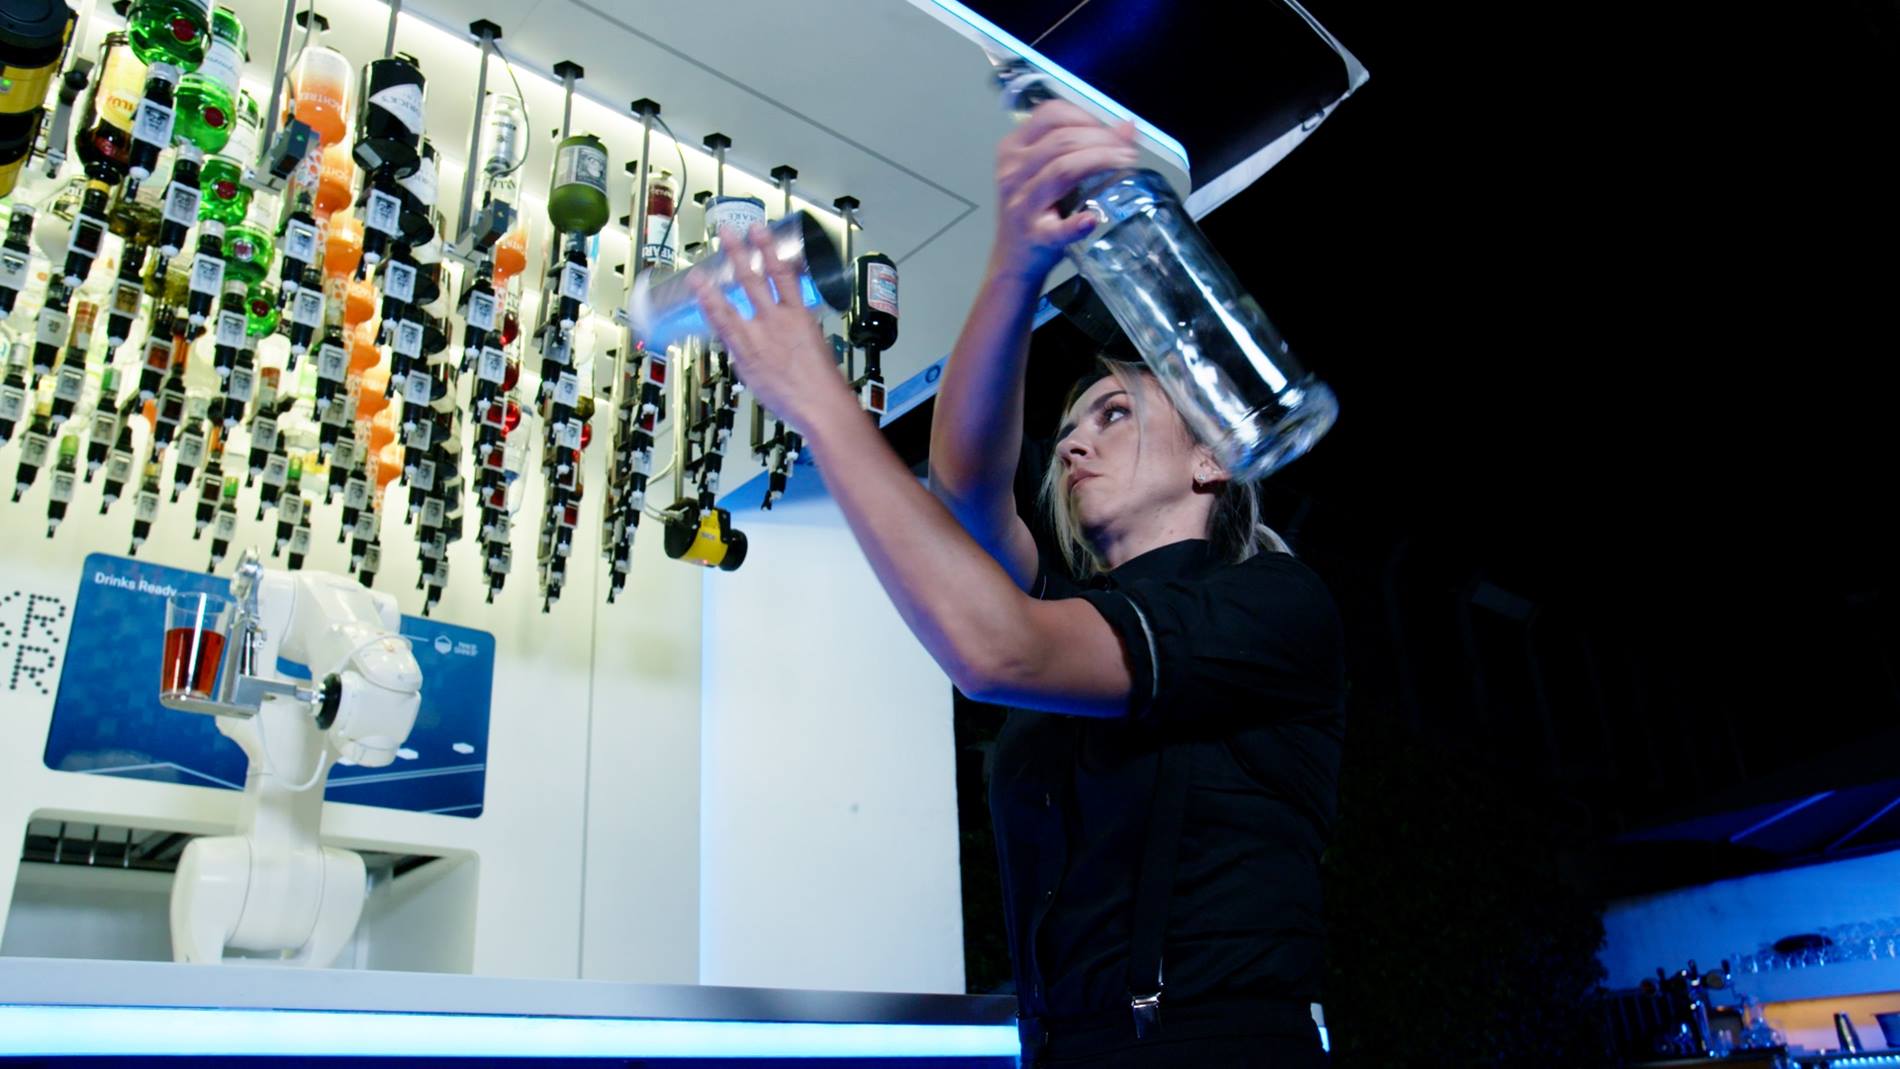 Silvia Daniela Istrate competing against the robotic bartender Toni